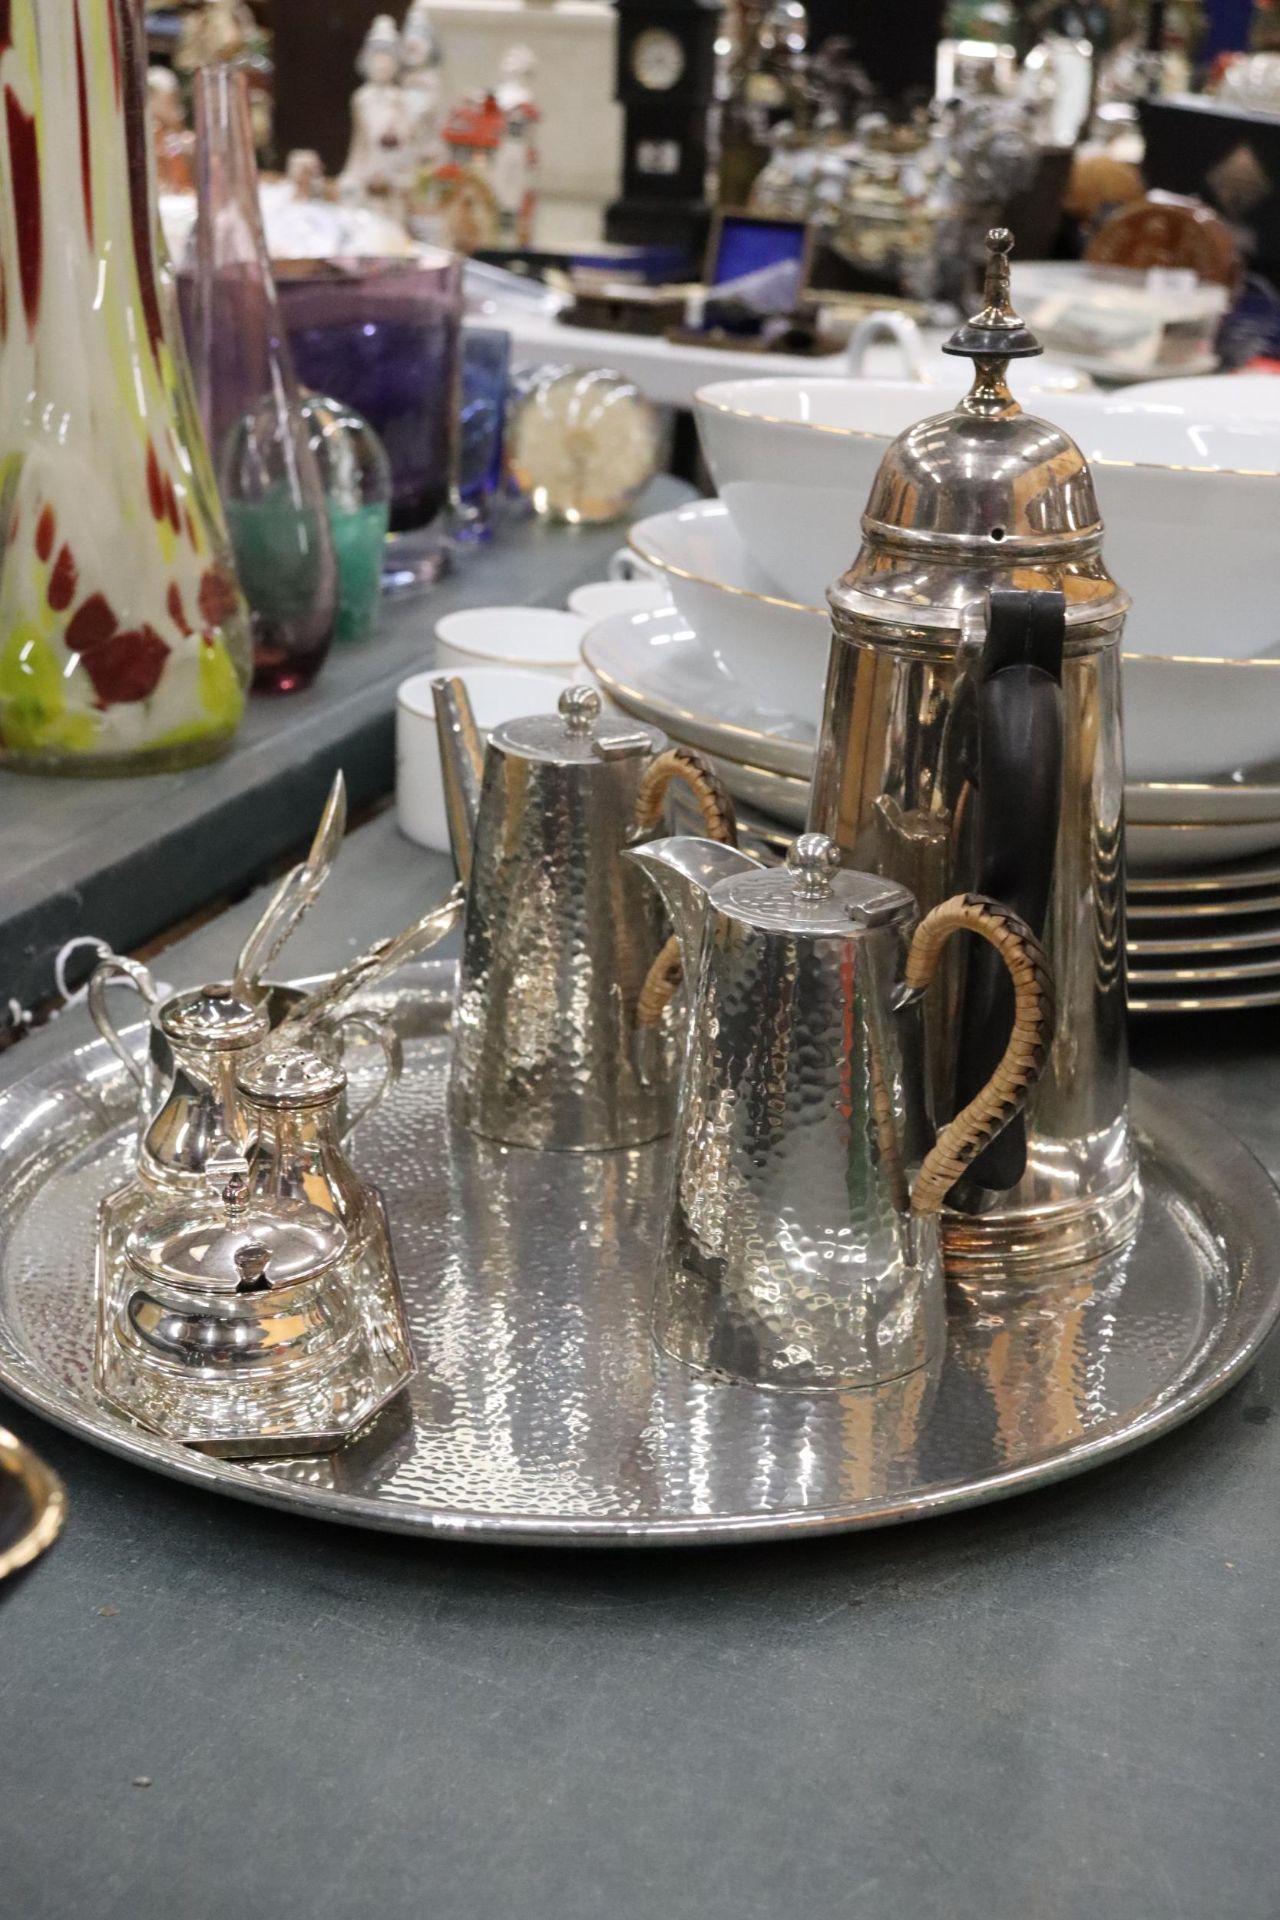 A PEWTER TRAY, COFFEE POT AND HOT WATER JUG, PLUS A SILVER PLATED COFFEE POT, CRUET SET, MUSTARD - Image 8 of 9